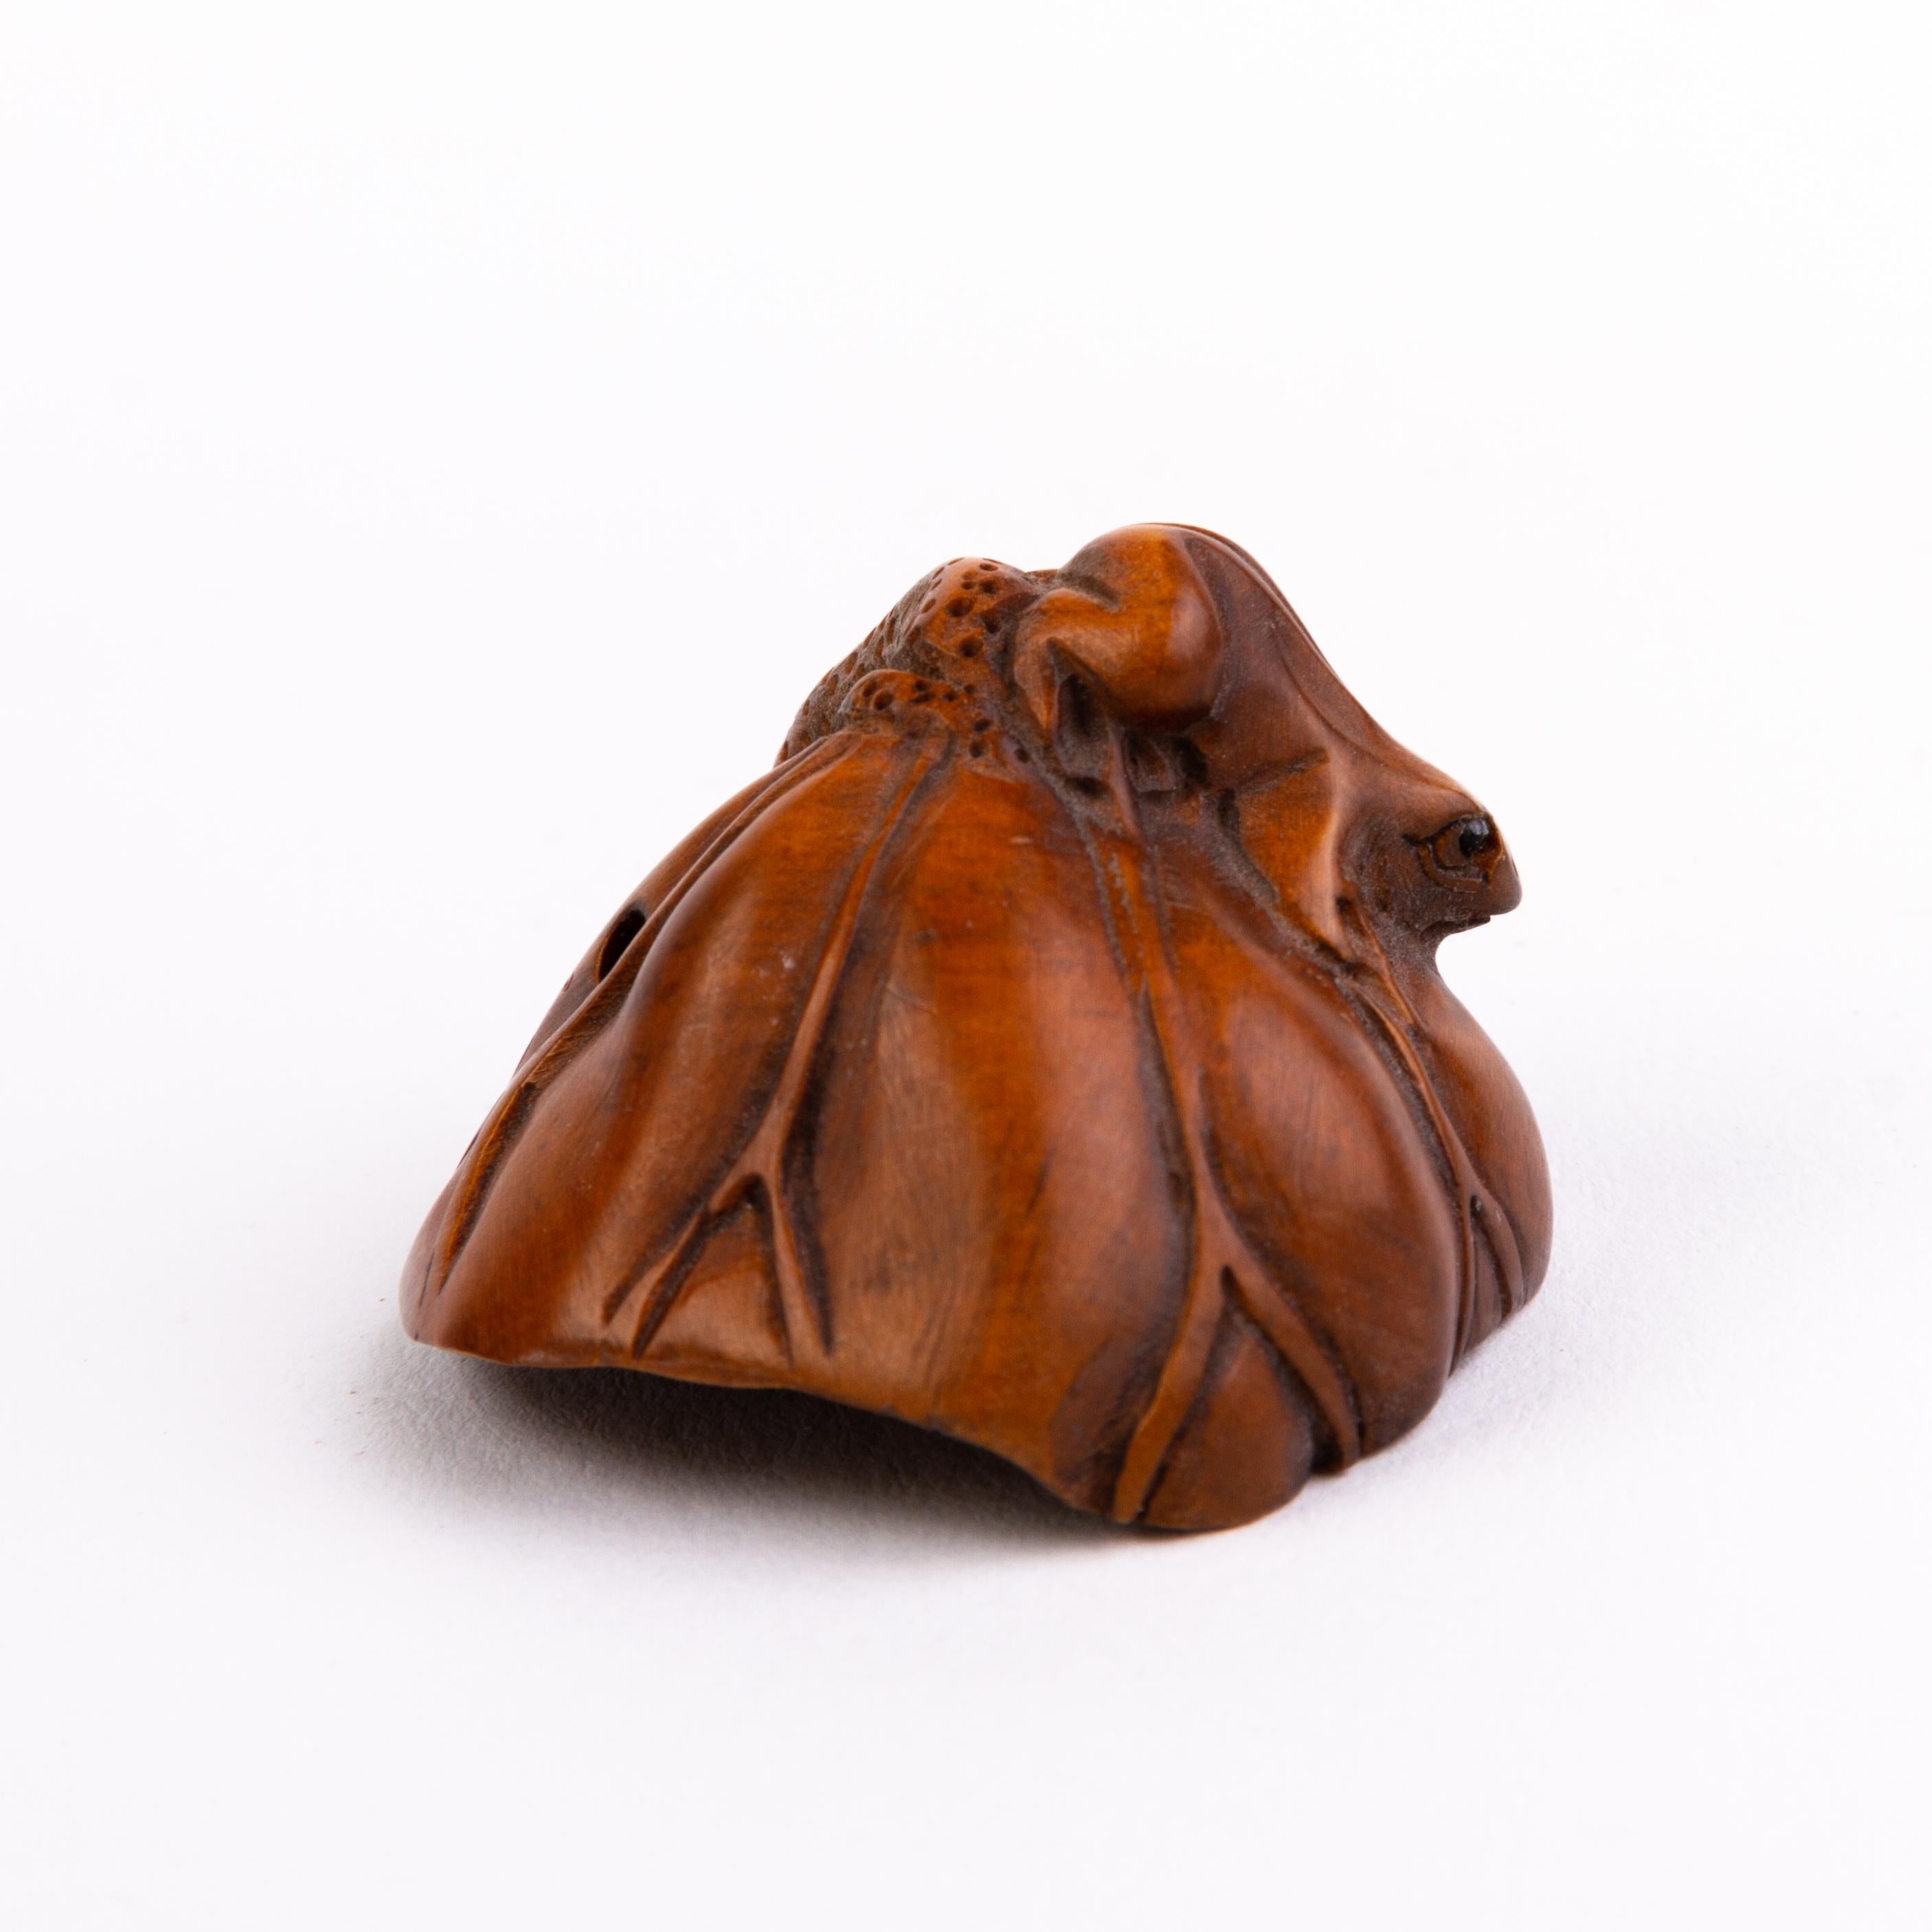 In good condition
From a private collection
Free international shipping
Signed Japanese Boxwood Netsuke Inro of a Tree Frog 